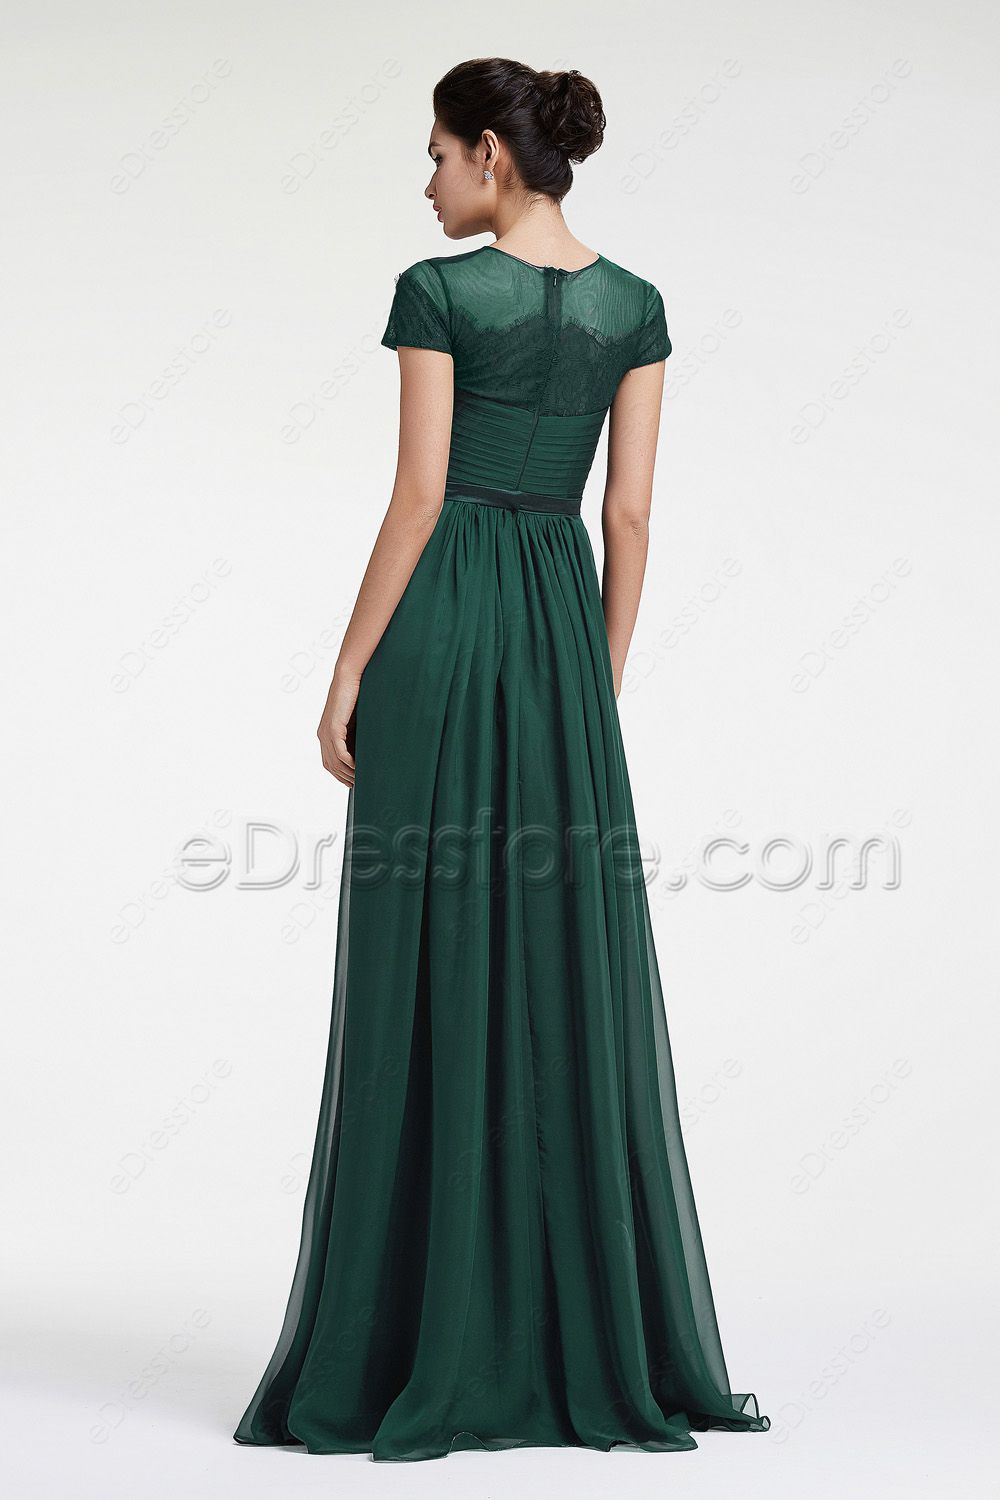 Hunter Green Off Shoulder A Line Forest Green Evening Dress With Beadings,  Crystals, And Lace Applique Floor Length Satin Gown For Prom, Formal  Events, Parties, Special Occasions From Allanha, $142.11 | DHgate.Com